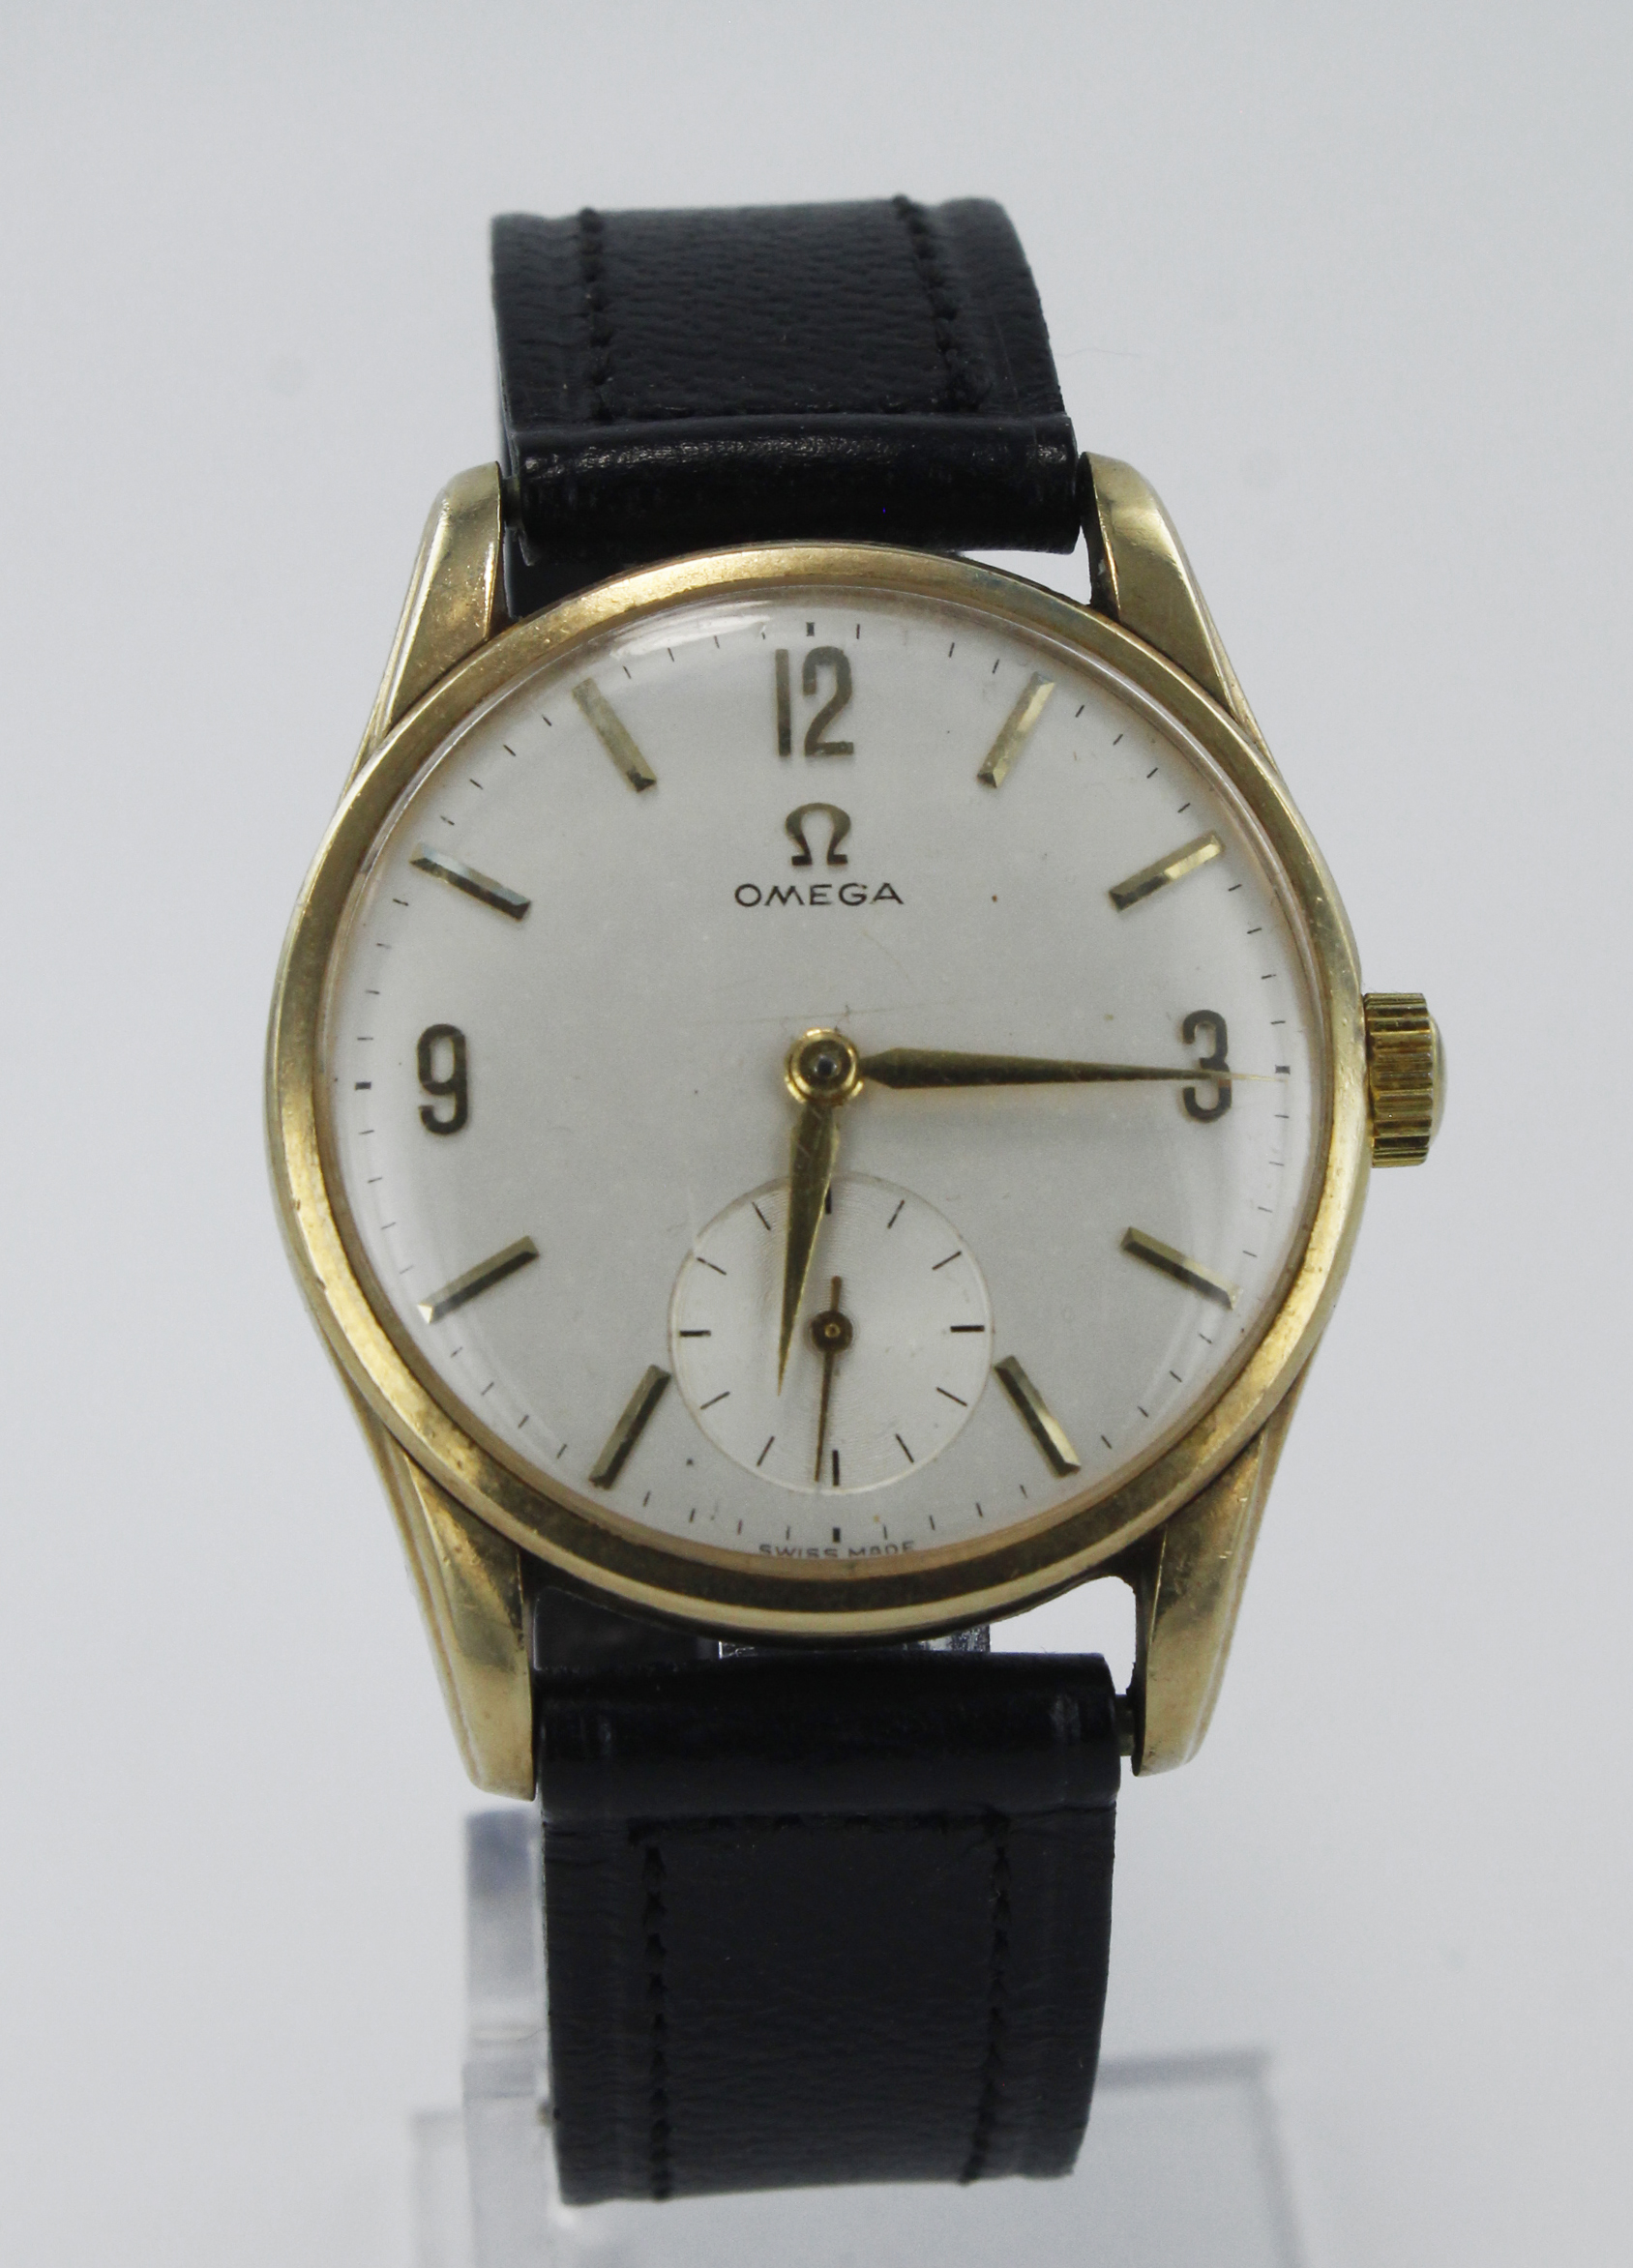 Gents 9ct cased Omega manual wind wristwatch, ref. 1215400, serial. 19201xxx, circa 1962. The